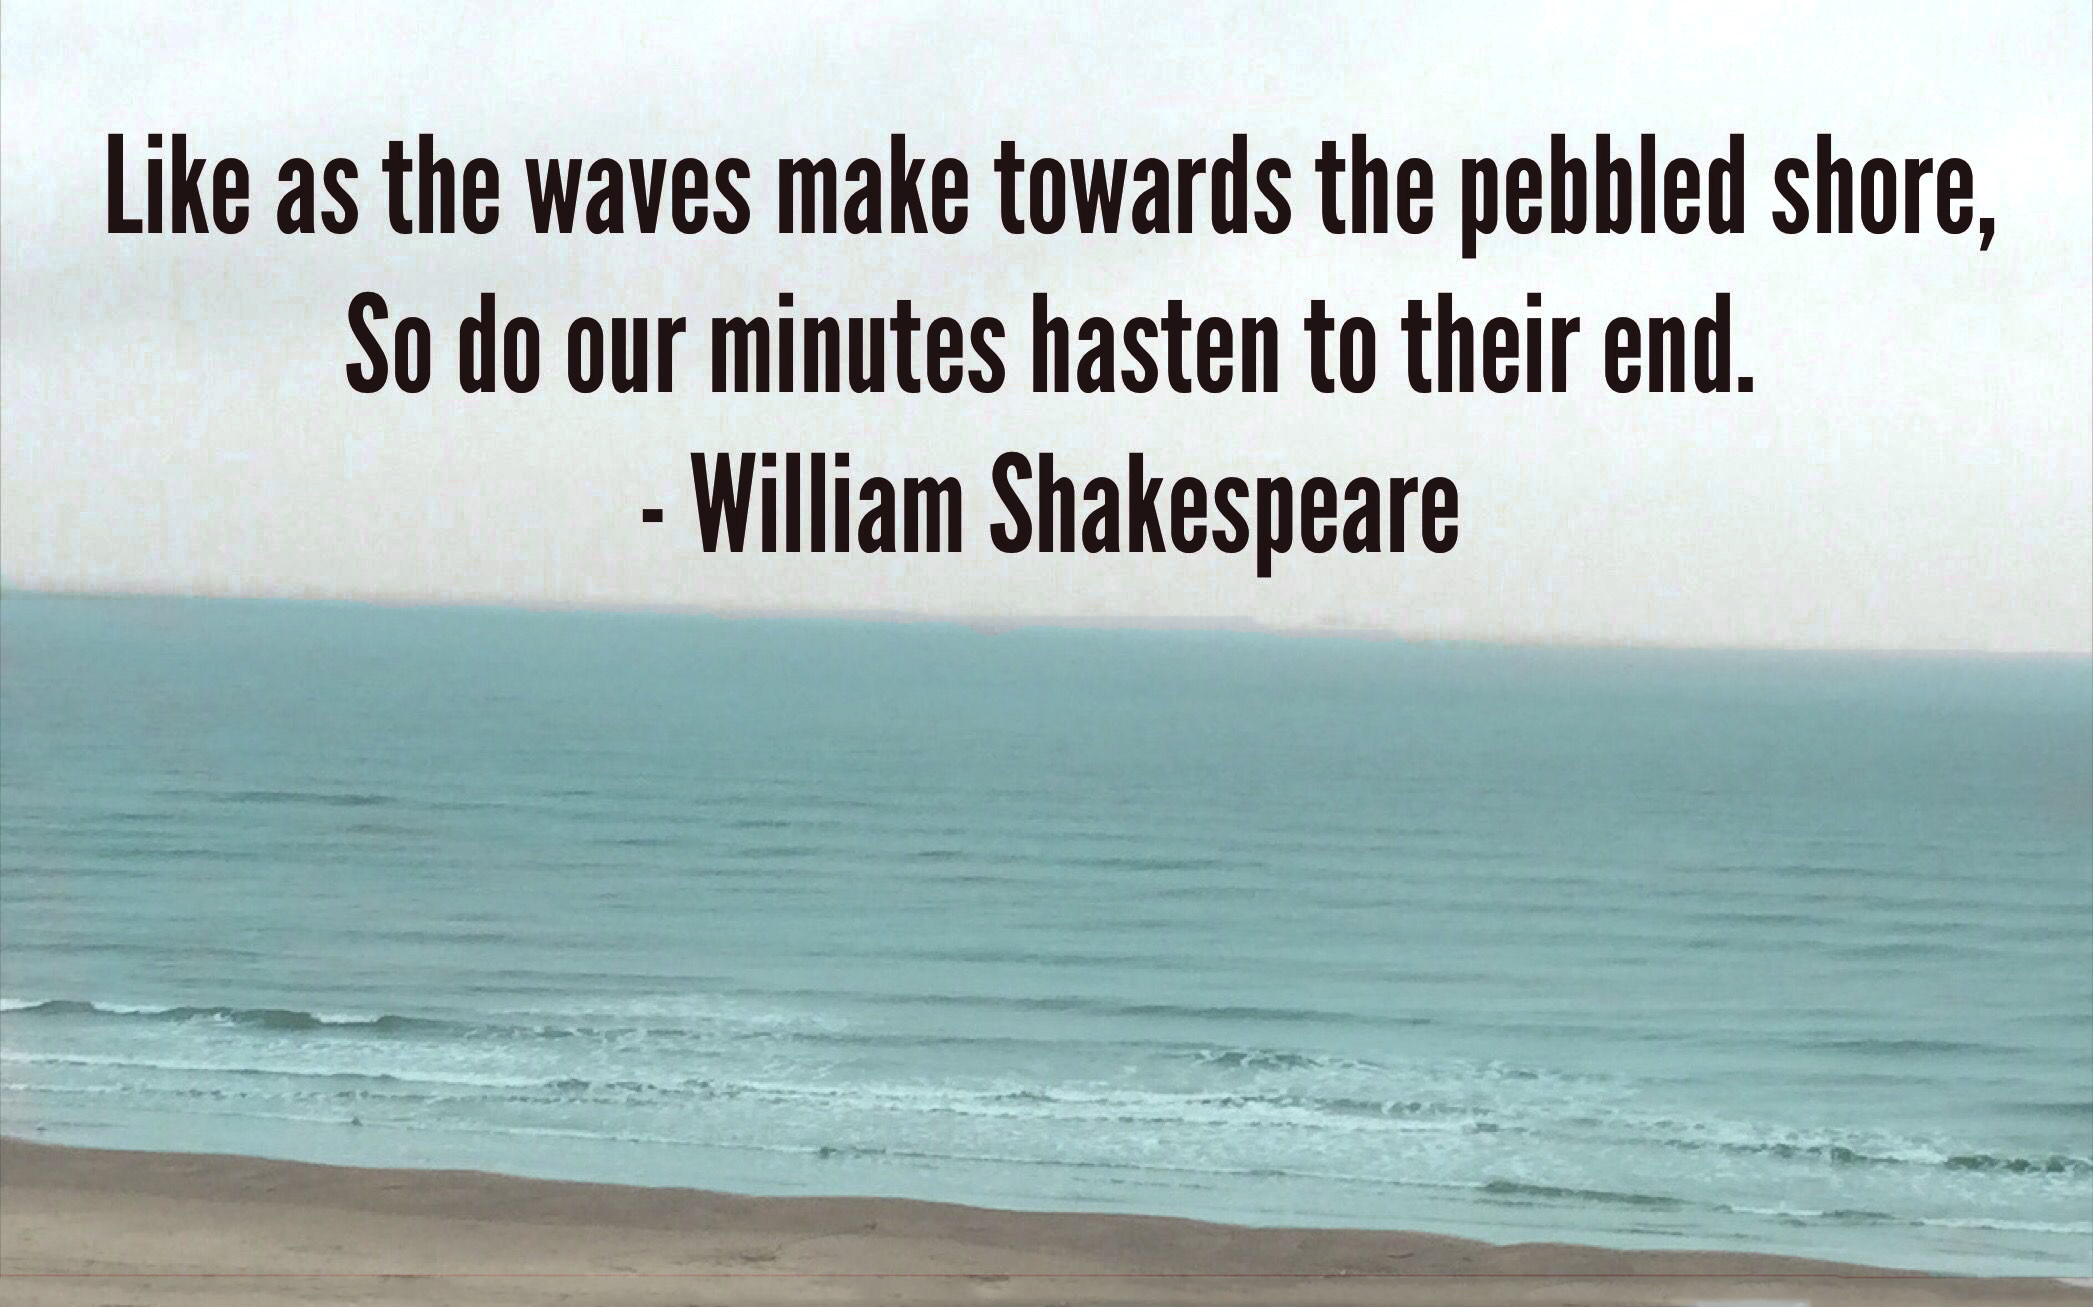 Amazing quote by Shakespeare